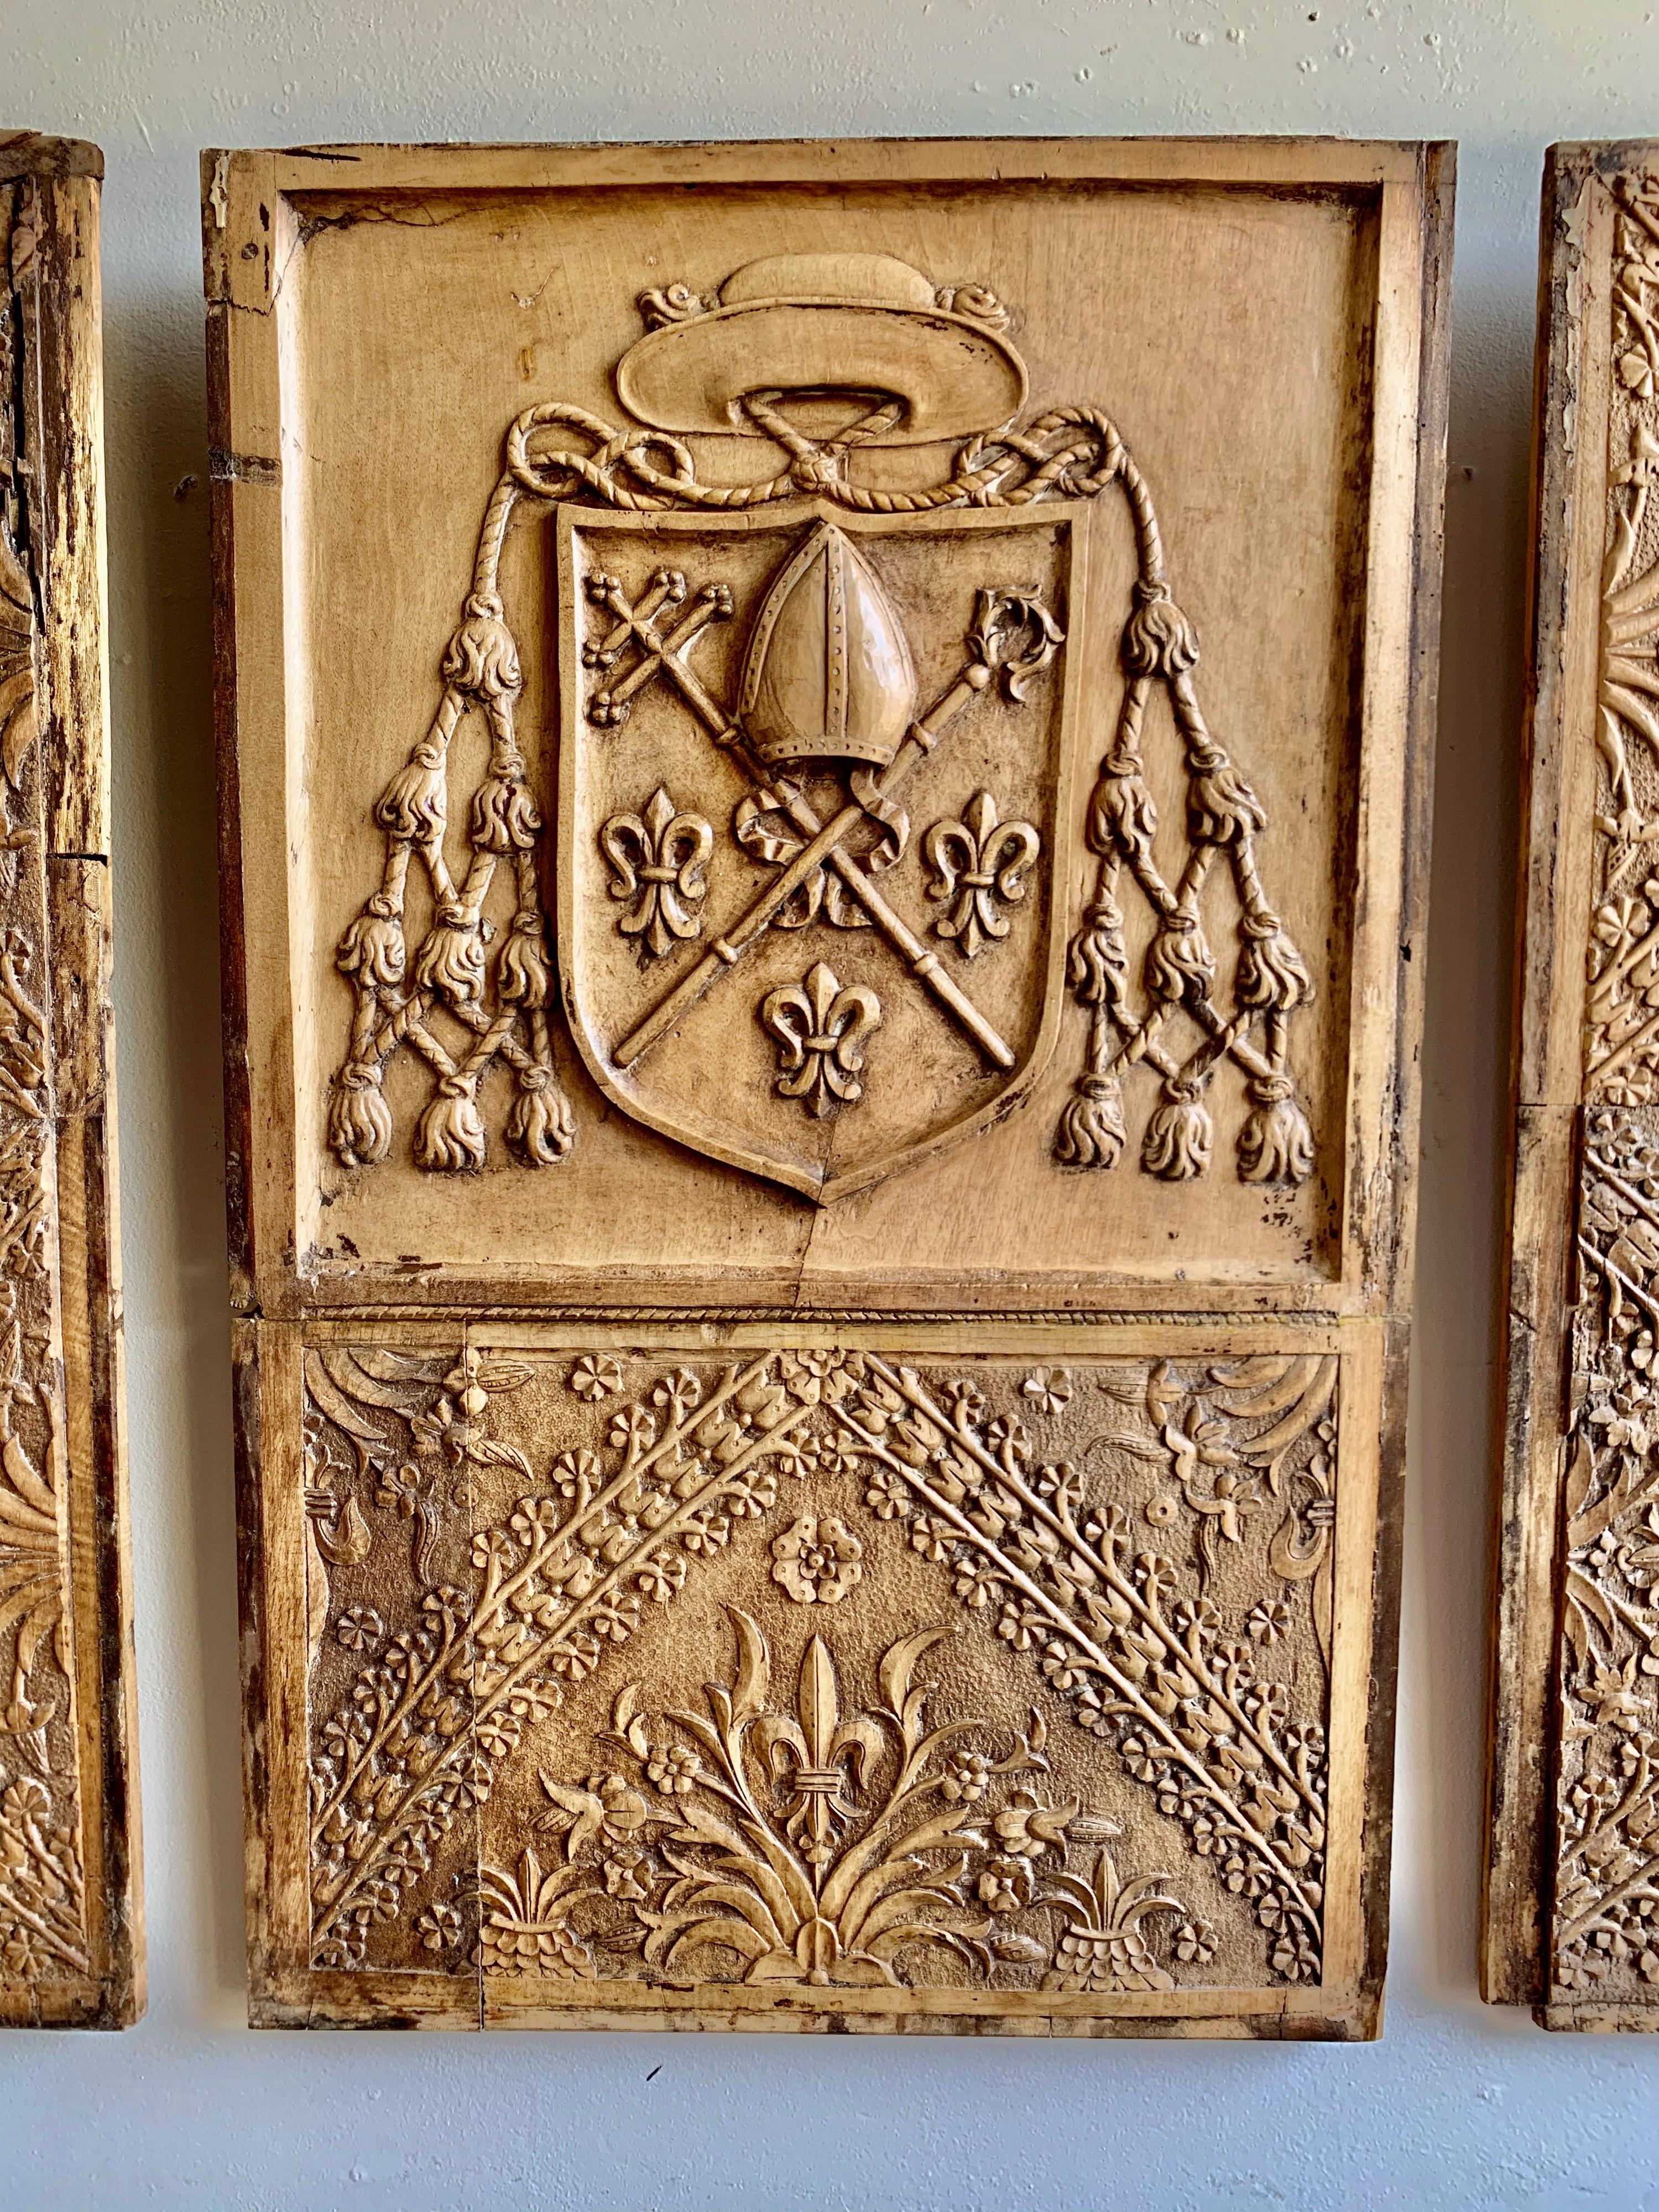 Set of 18th century Spanish wood panels with fine hand carved details throughout. The center panel has a shield that is draped with carved tassels. Crossed swords are in the center with fleur-de-lis throughout. You could even attach them and make a